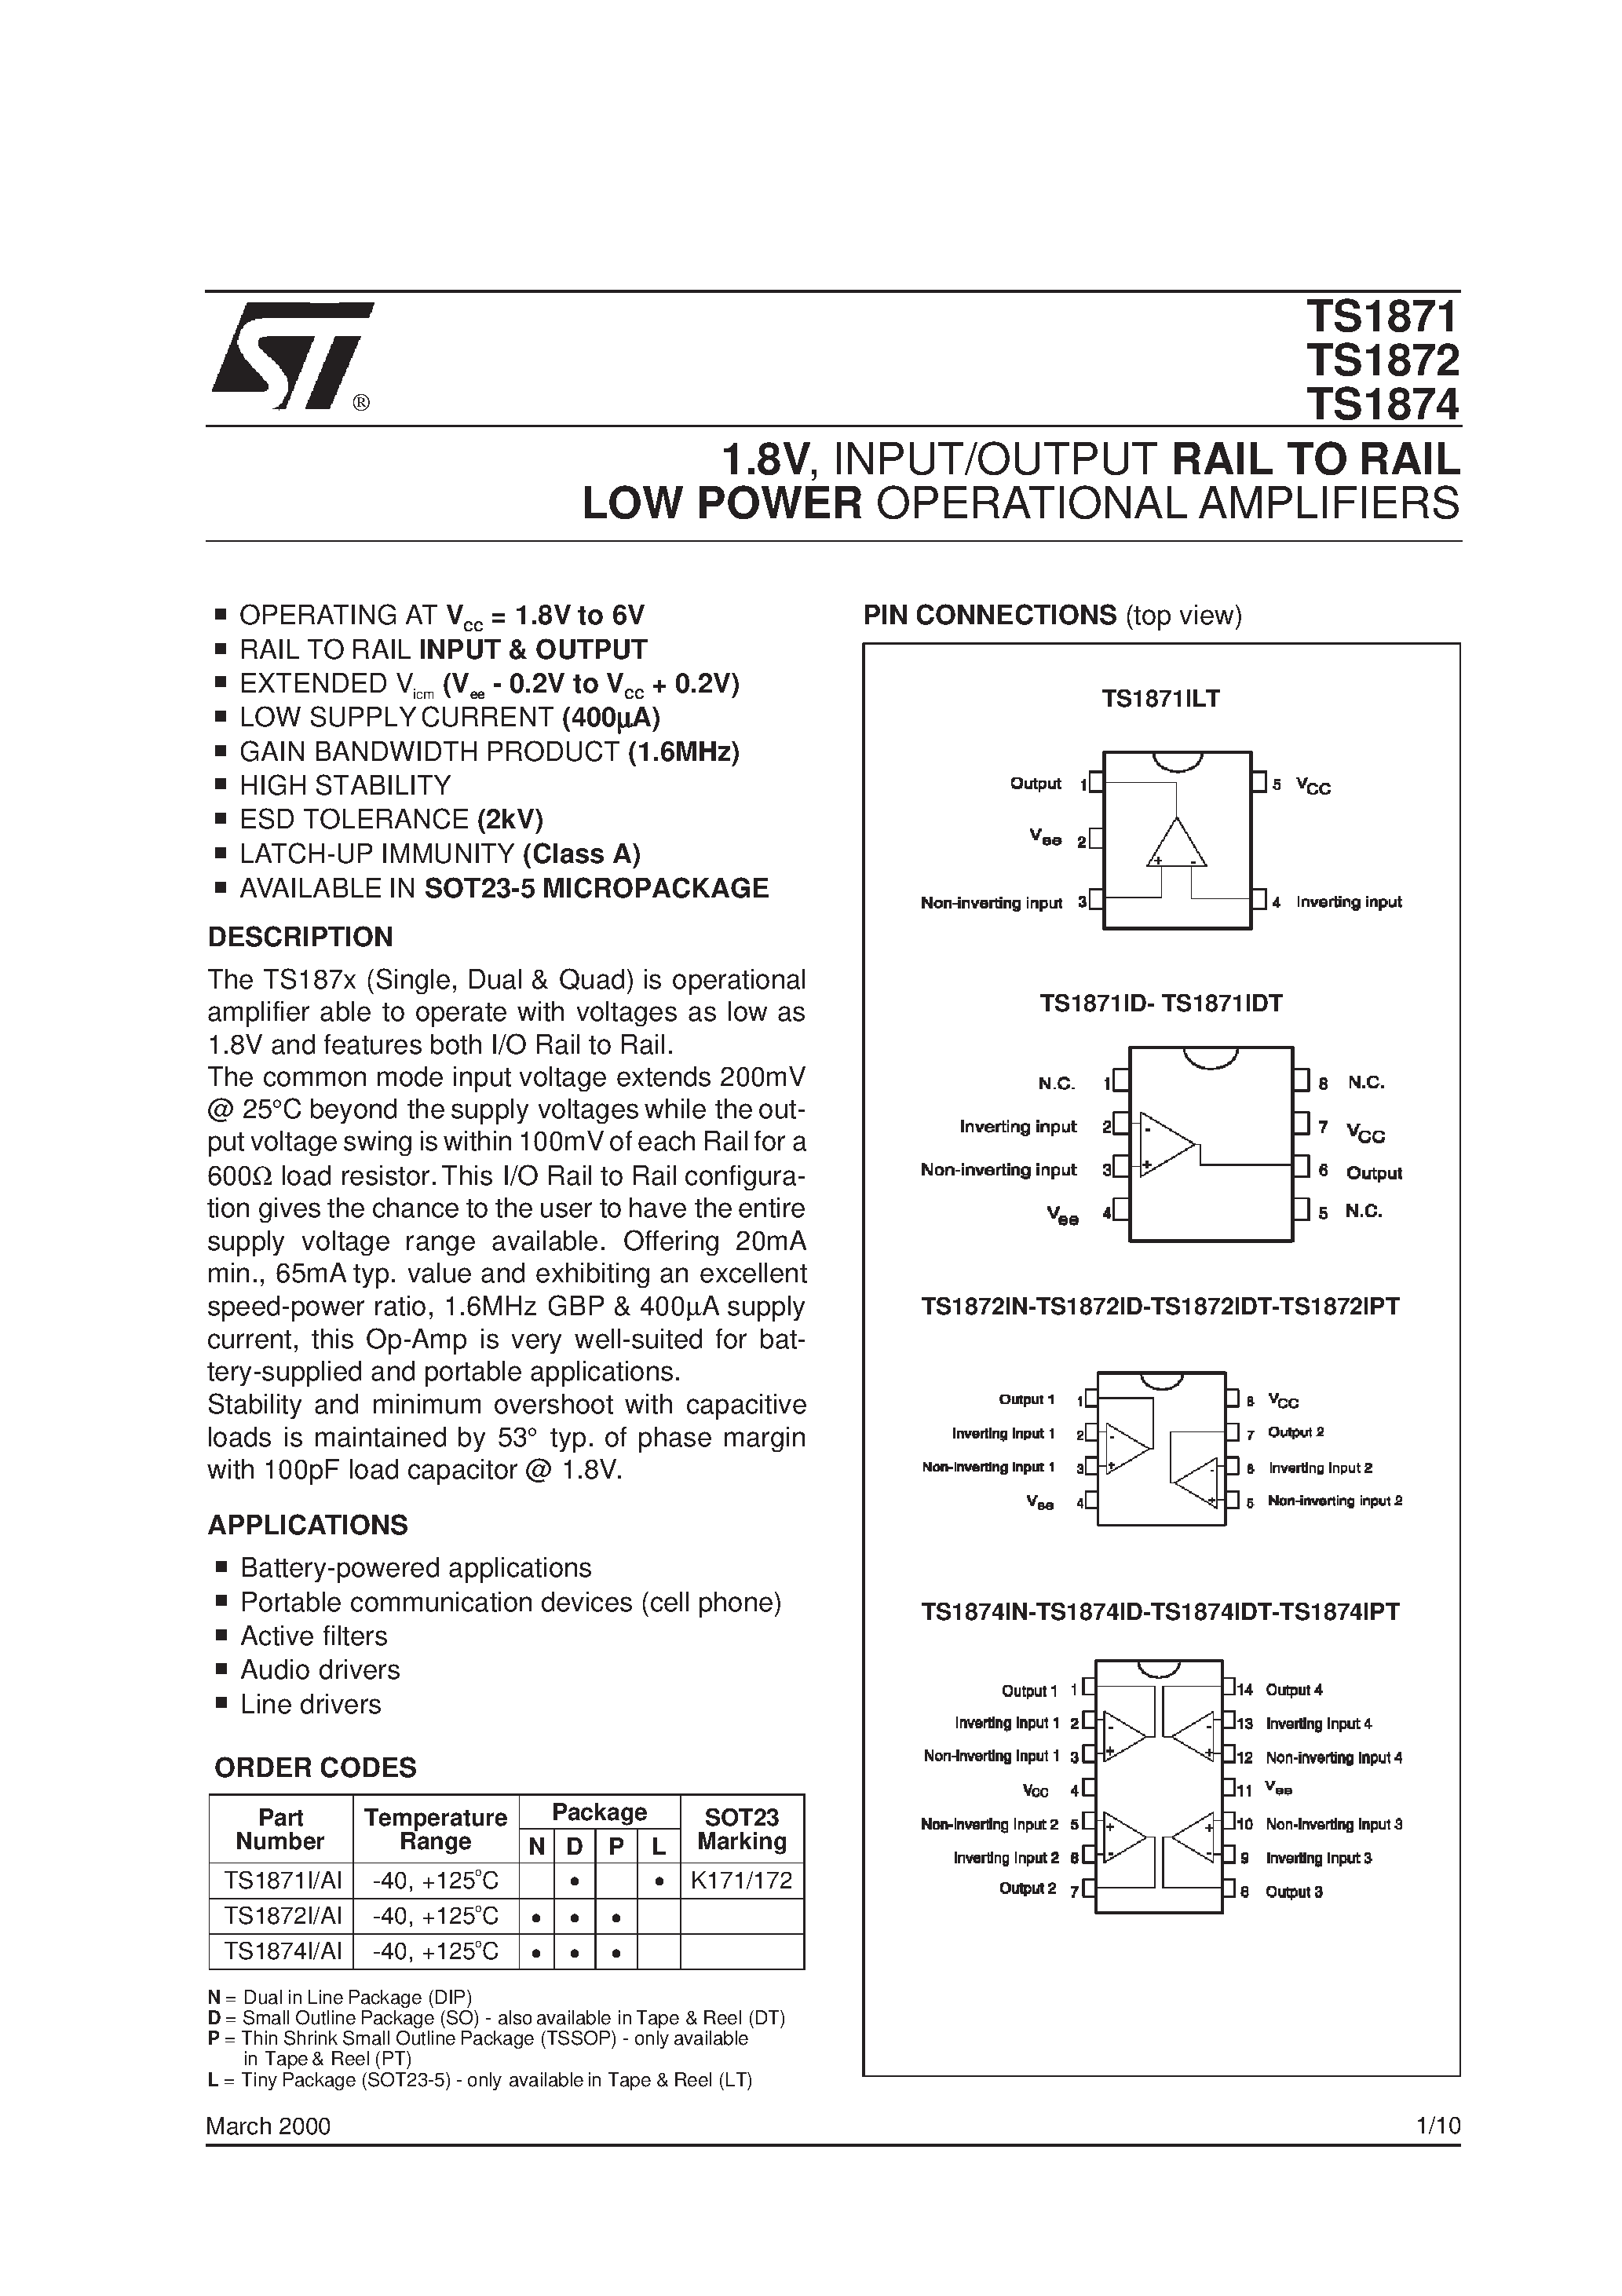 Datasheet TS1872I - 1.8V/ INPUT/OUTPUT RAIL TO RAIL LOW POWER OPERATIONAL AMPLIFIERS page 1